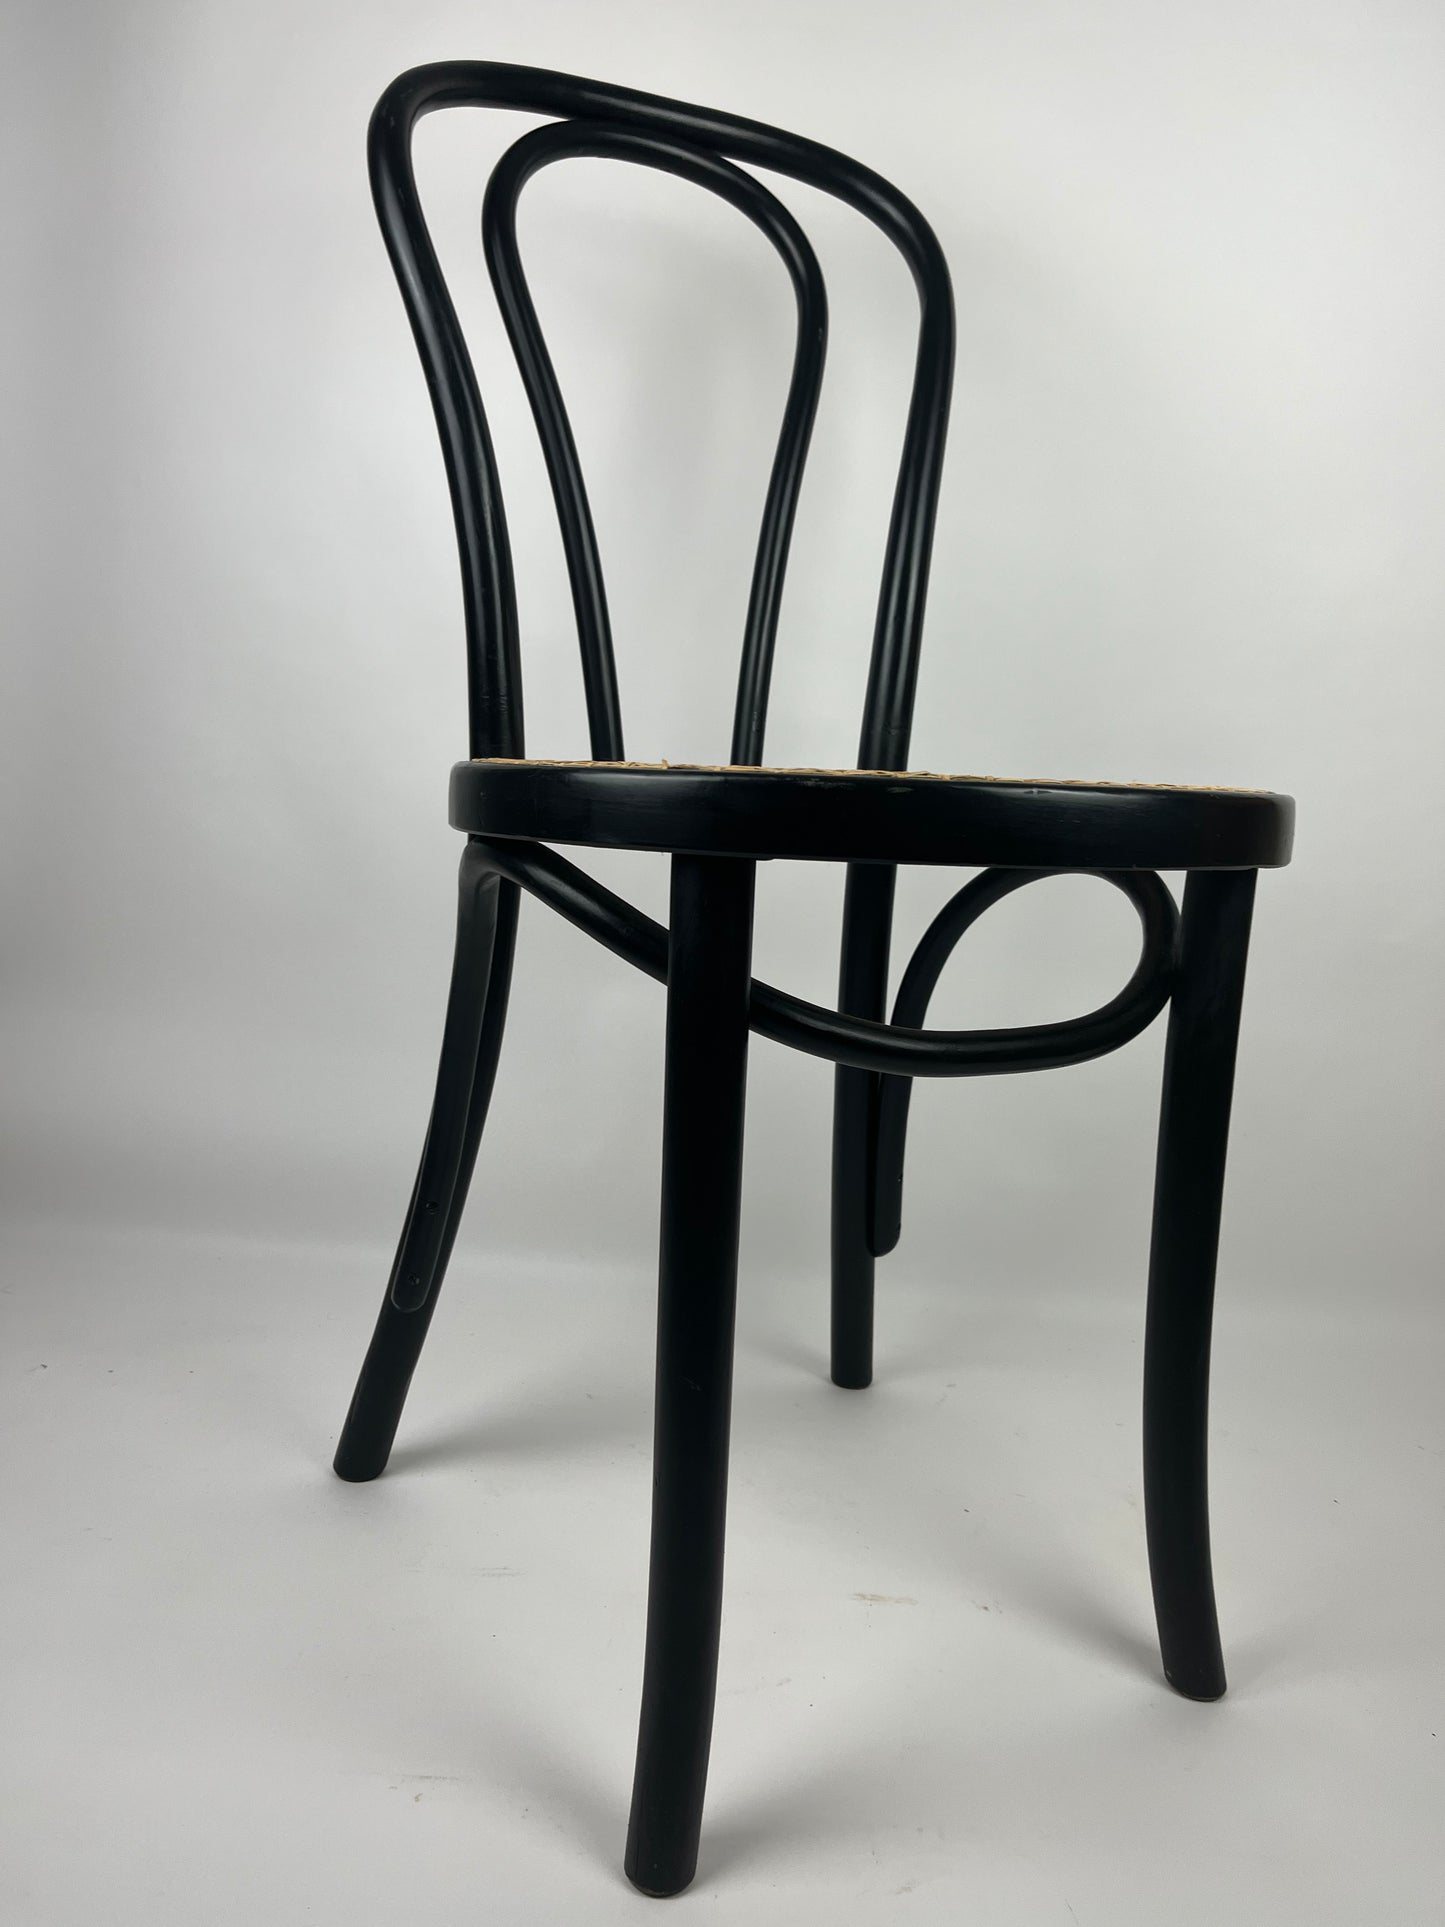 MICHAEL THONET CAFE CHAIR